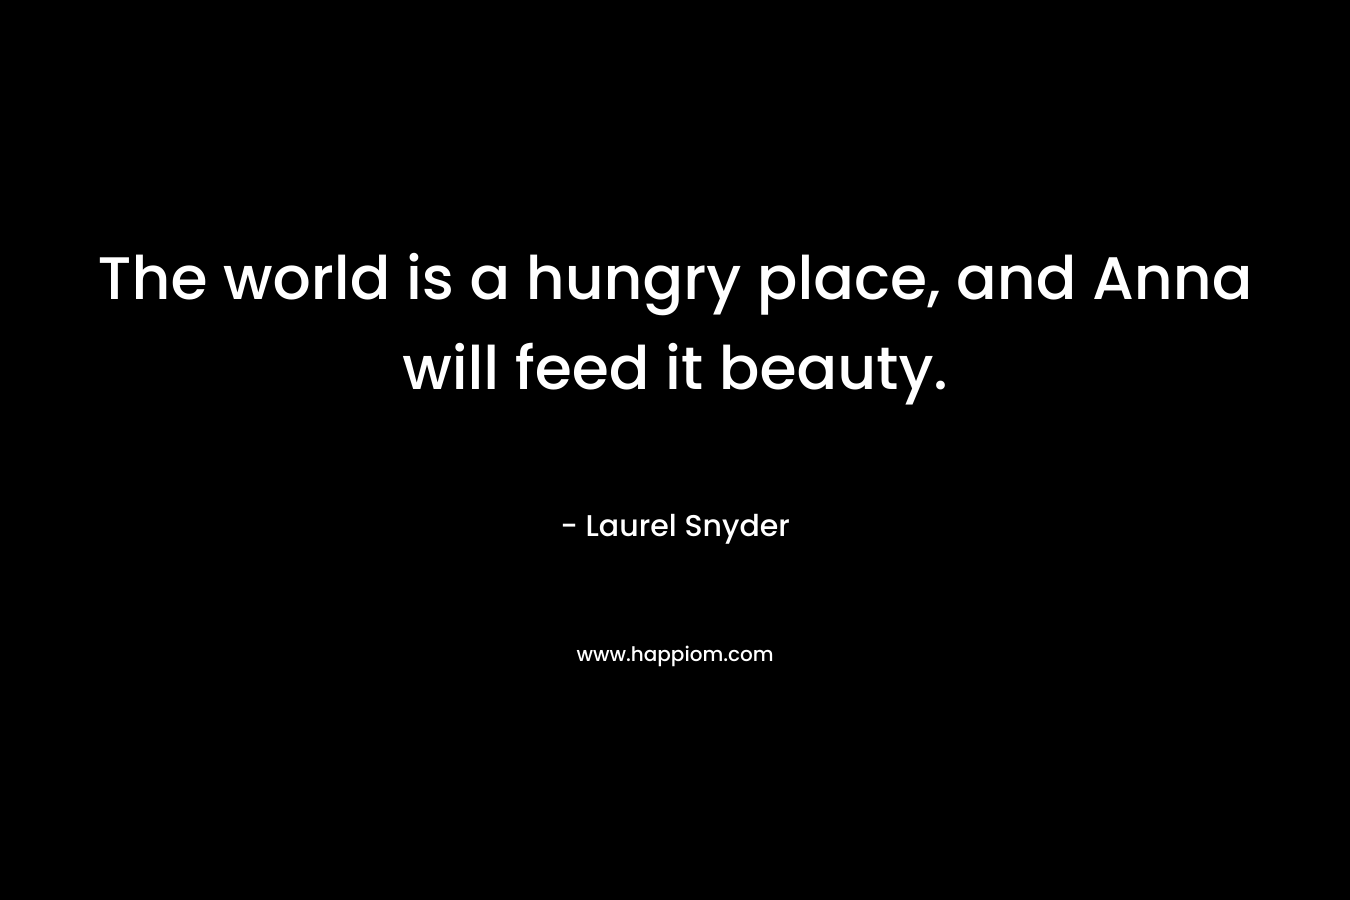 The world is a hungry place, and Anna will feed it beauty. – Laurel Snyder